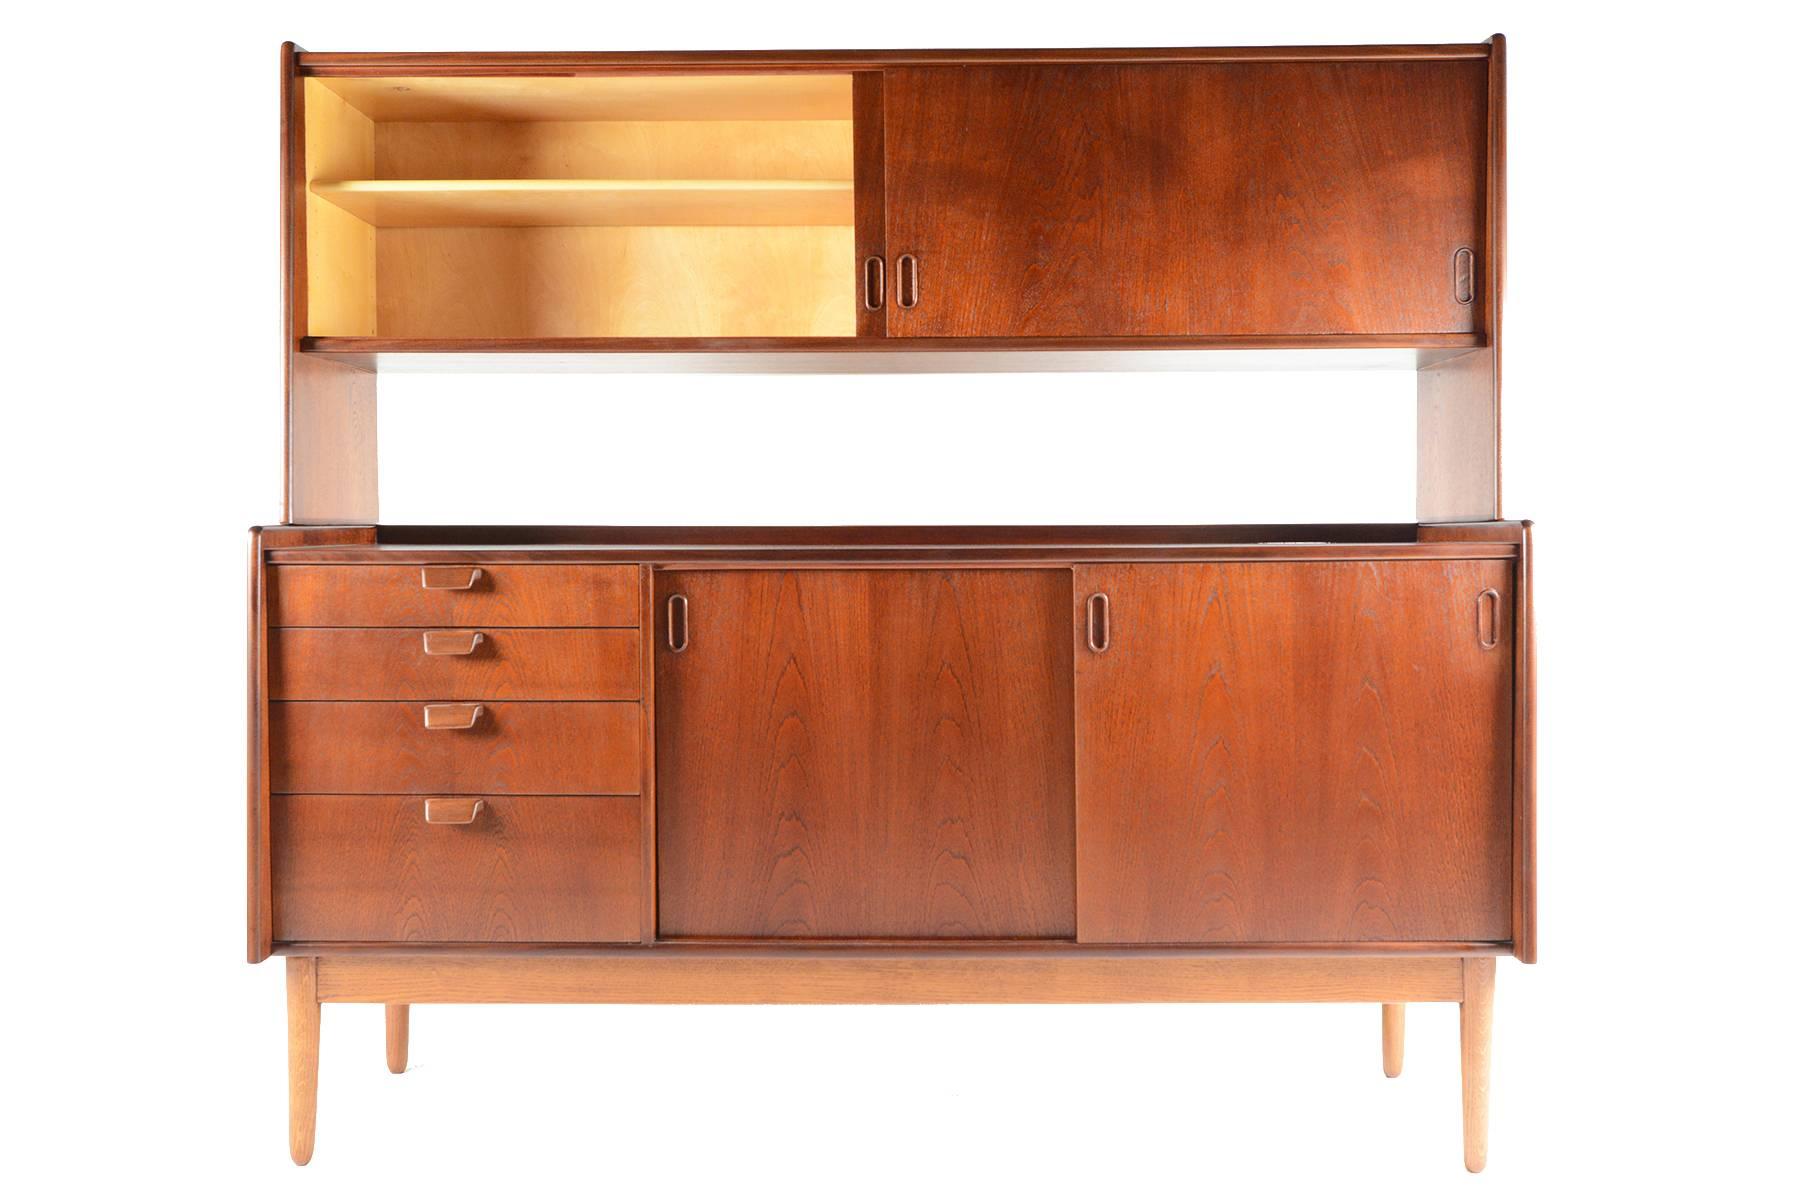 This wonderful modular Danish modern Mid-Century teak credenza with hutch is the perfect versatile piece for any modern home. The credenza supports a teak sliding door hutch with two bays and adjustable shelves. Lower credenza features two sliding